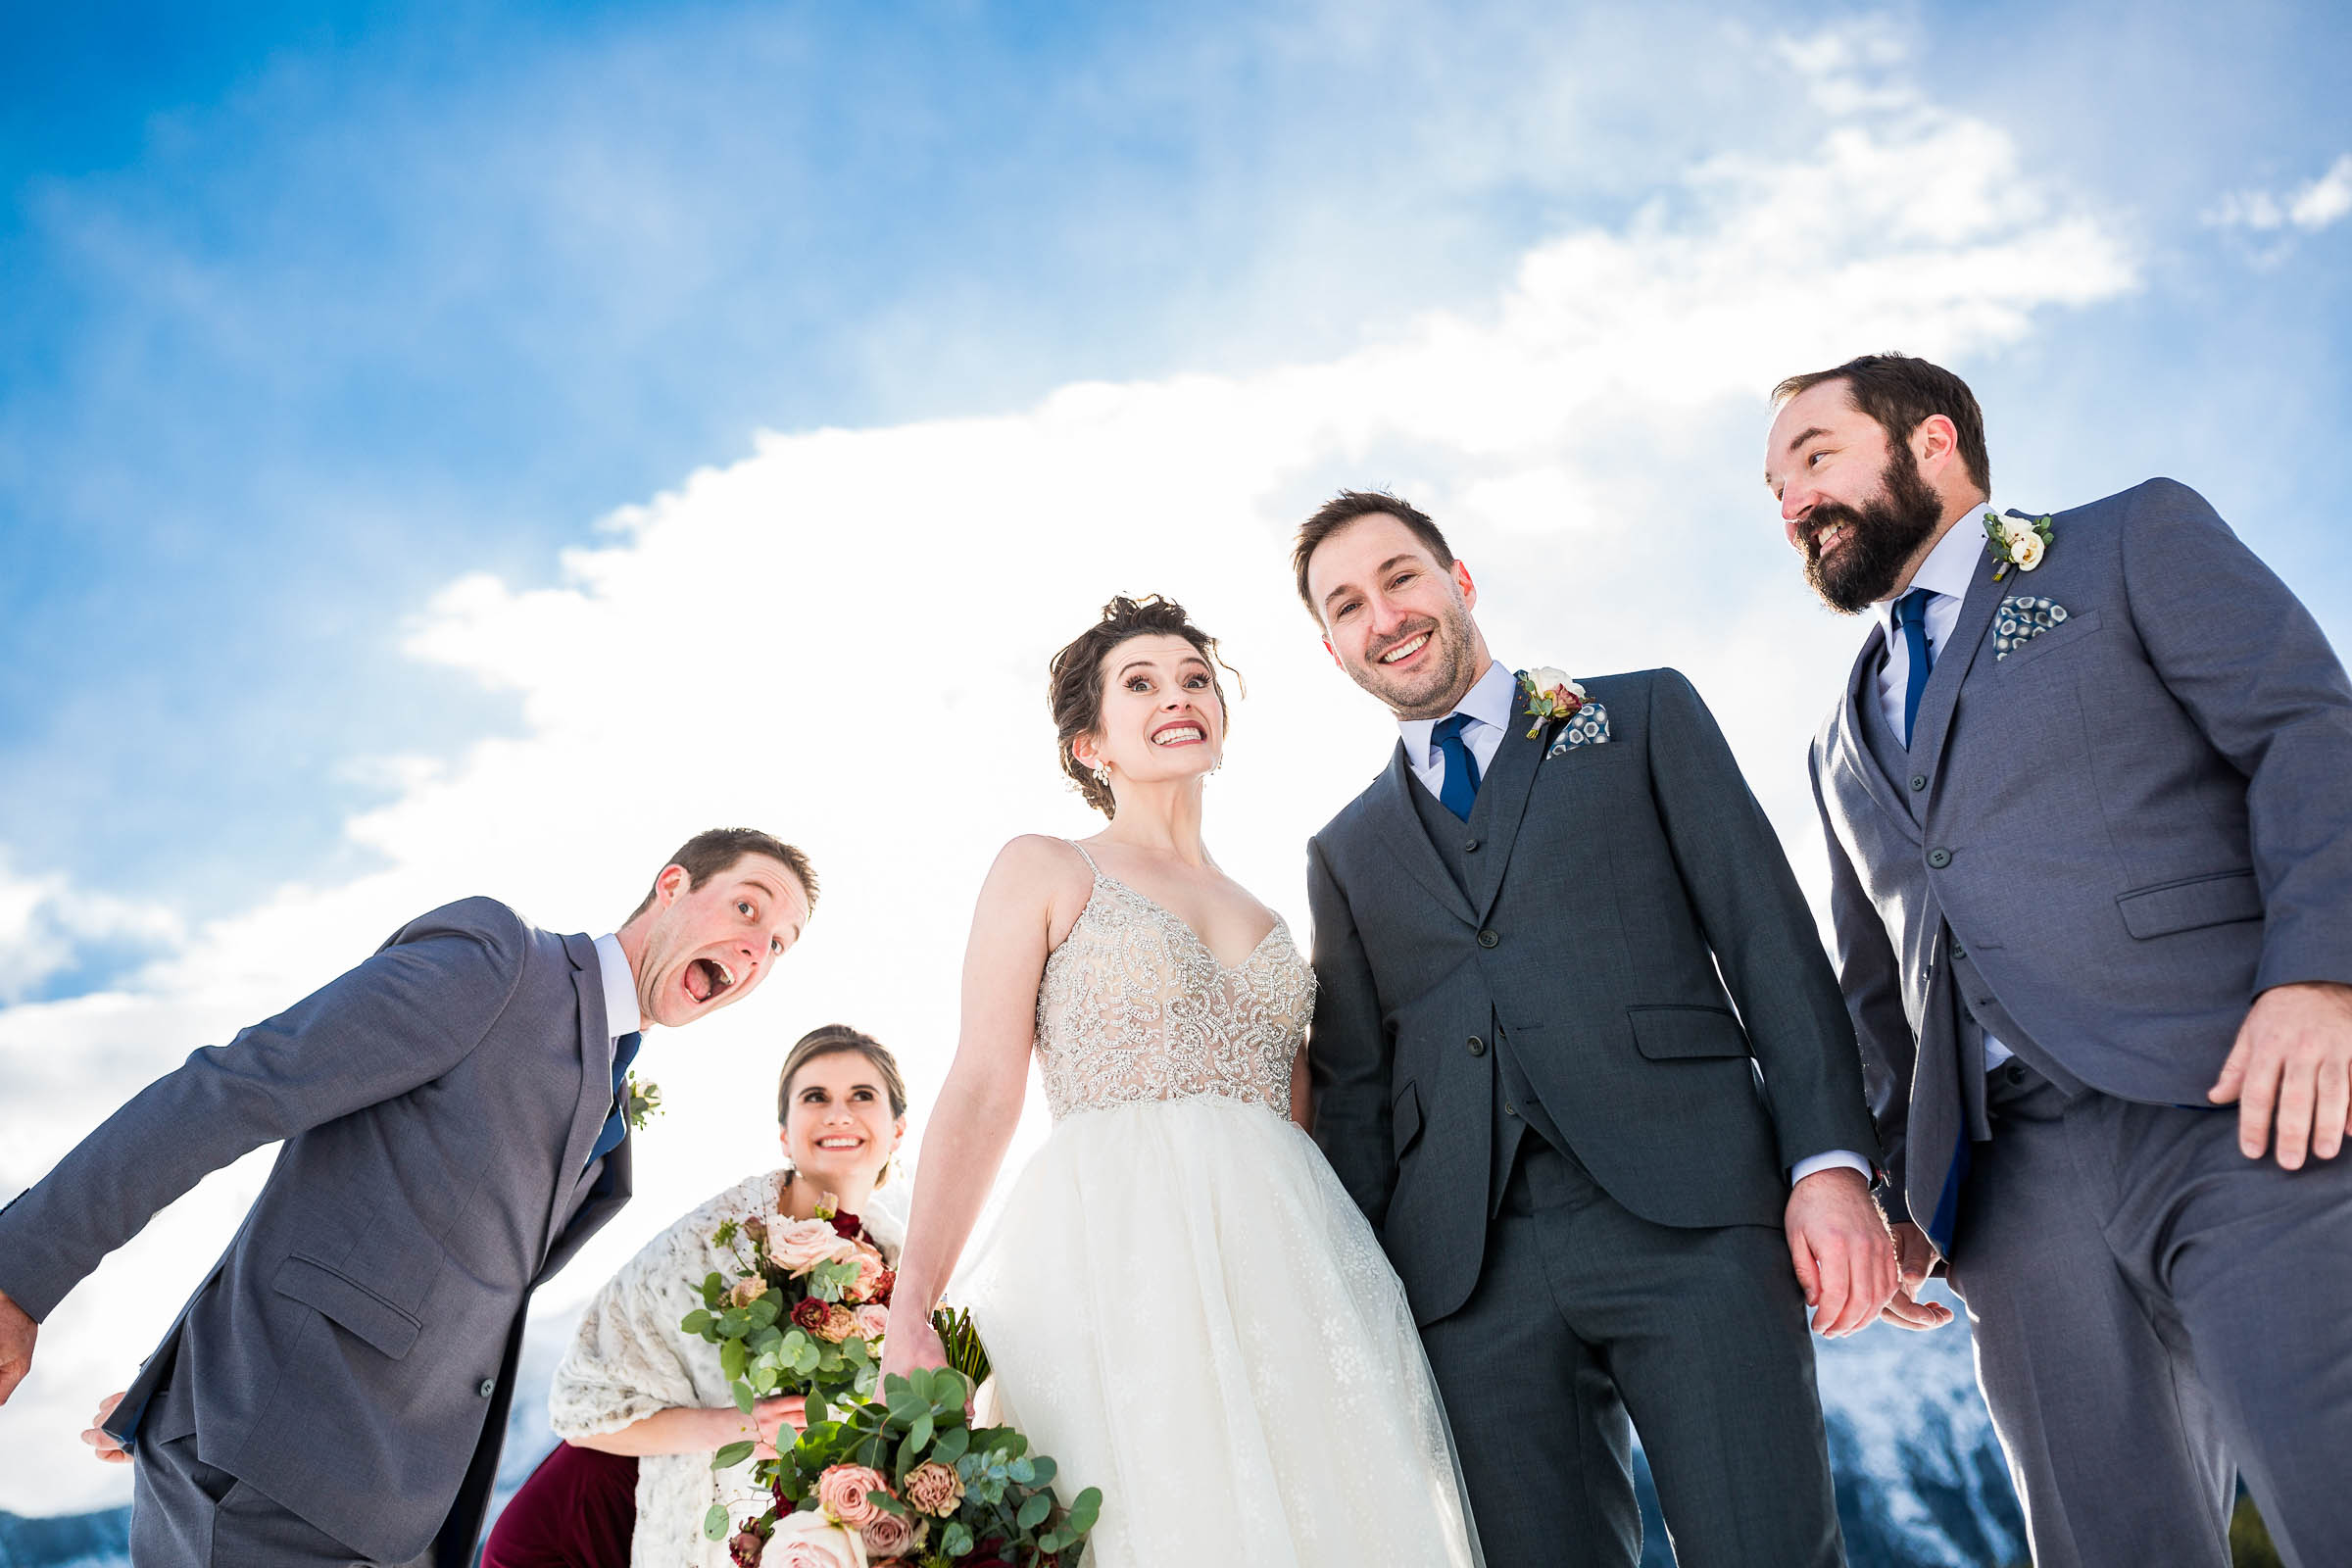 Smiling wedding party against blue sky